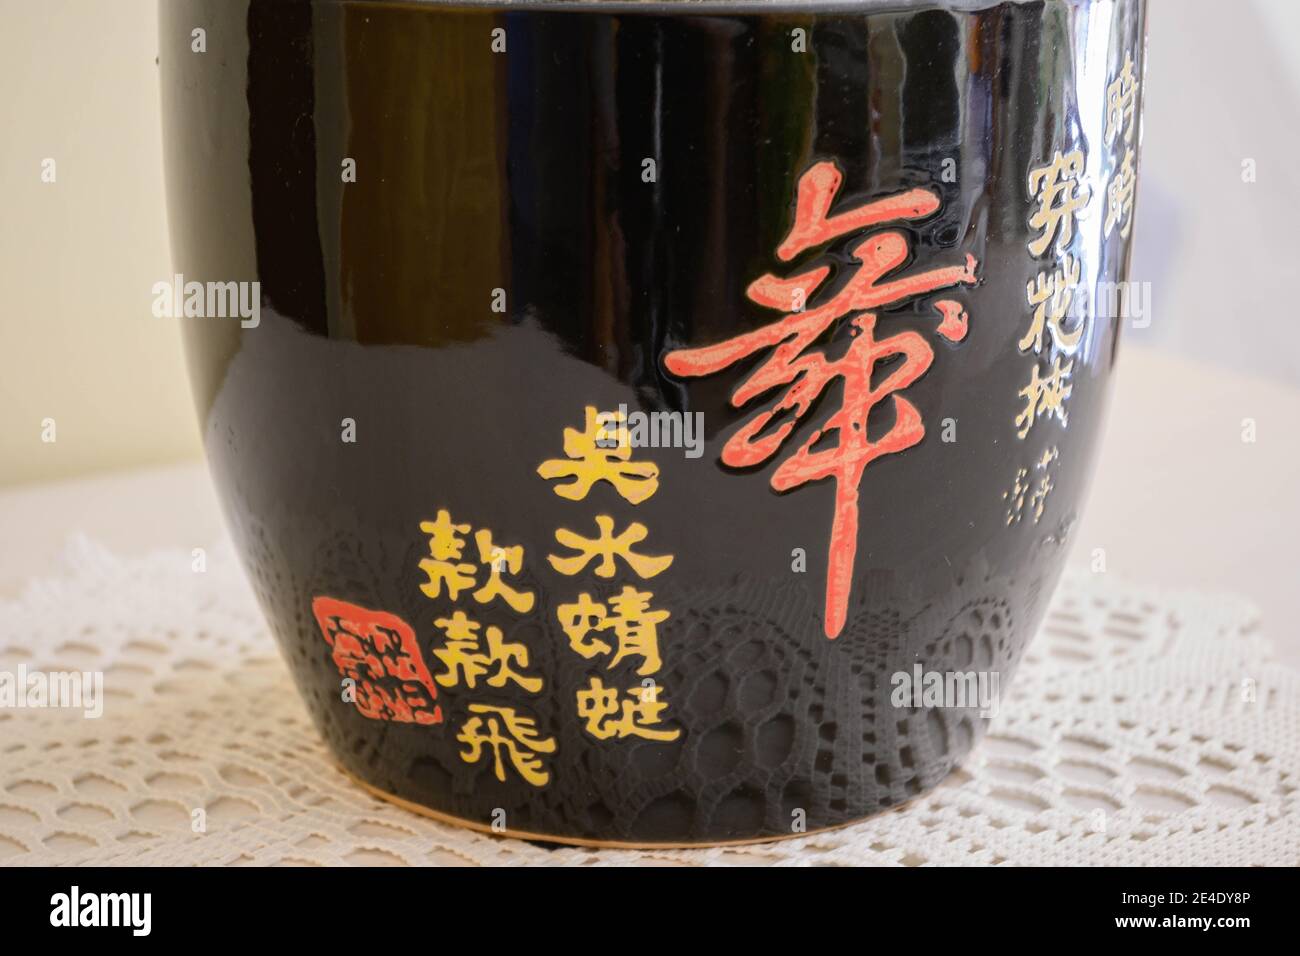 Ceramic vase with Chinese ideograms used for the cultivation of succulents. Stock Photo